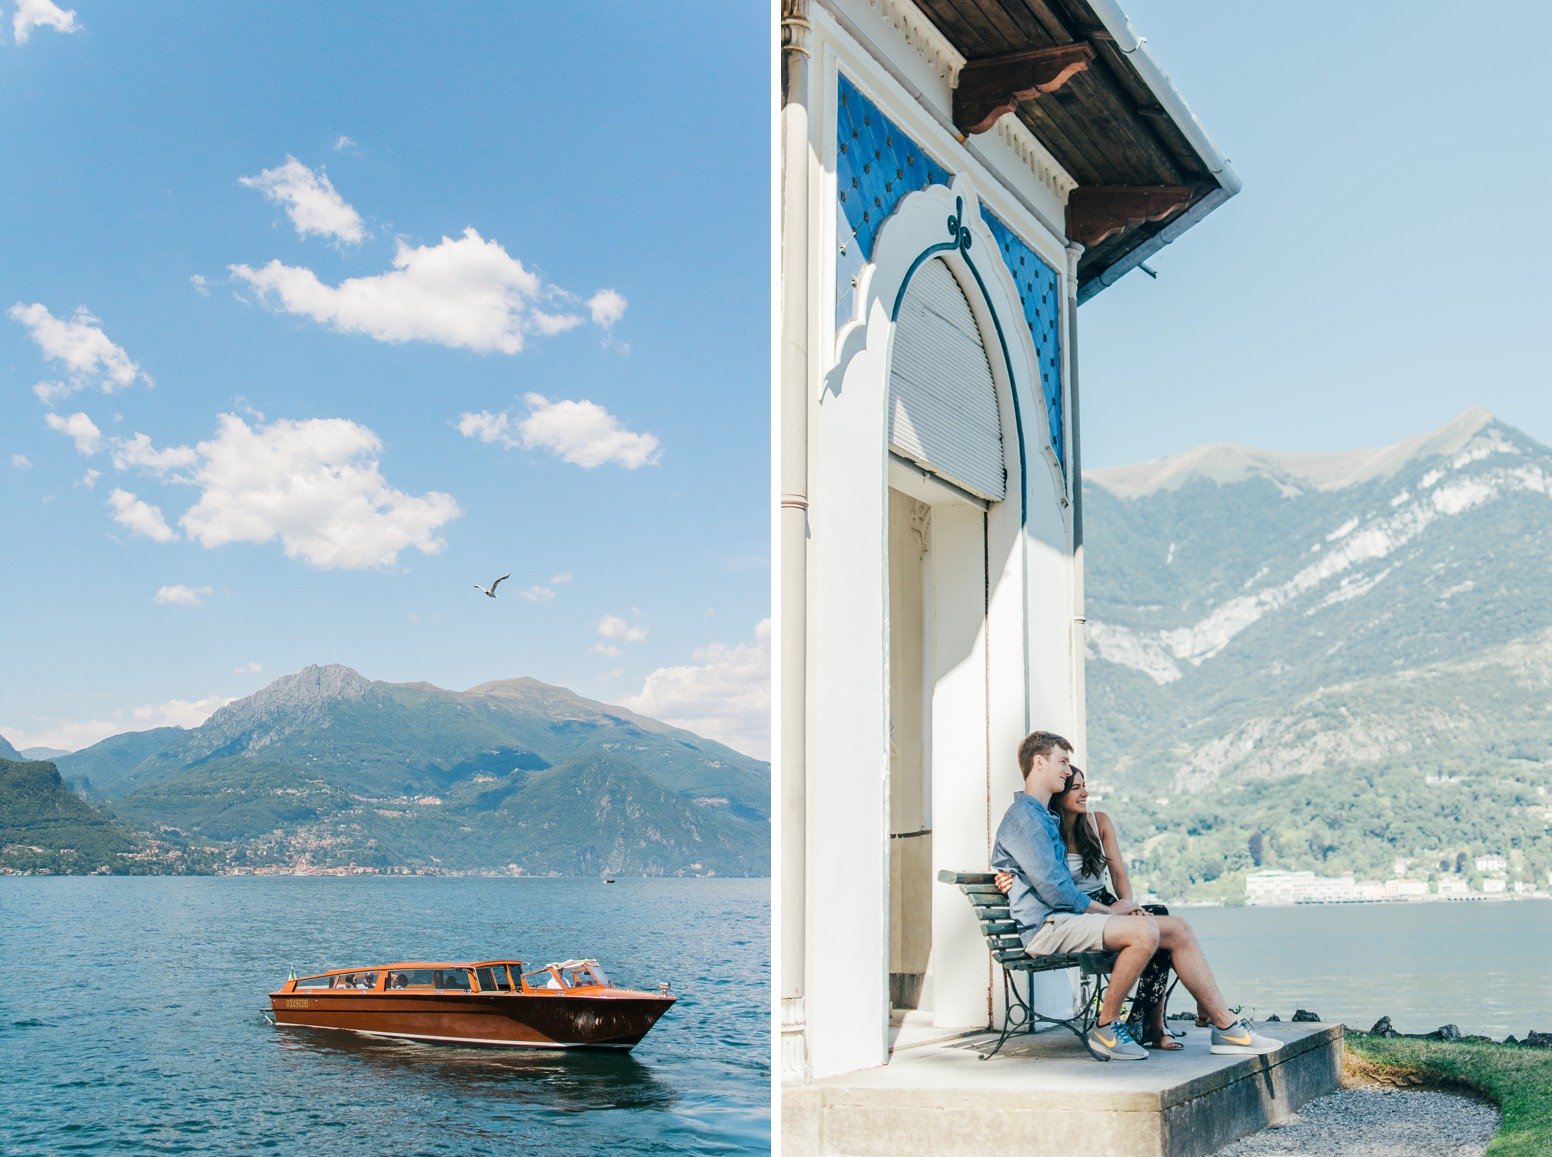 Boat in Lake Como and couple on bench